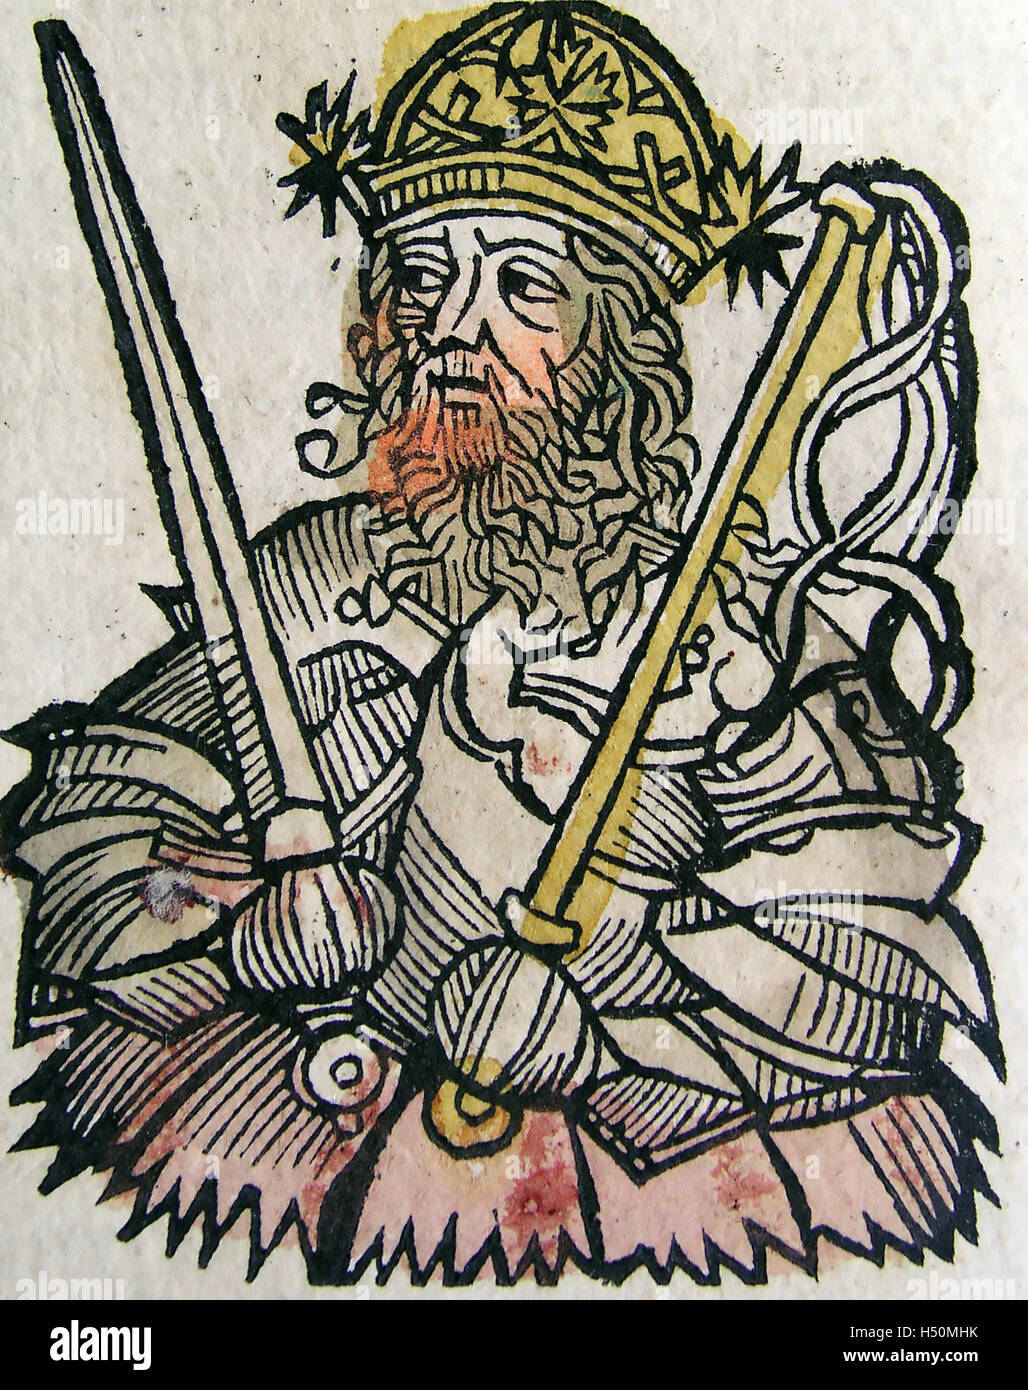 ATTILA THE HUN (c 406-453) ruler of the Hunic Empire as shown in the Nuremberg Chronicle in 1493 Stock Photo